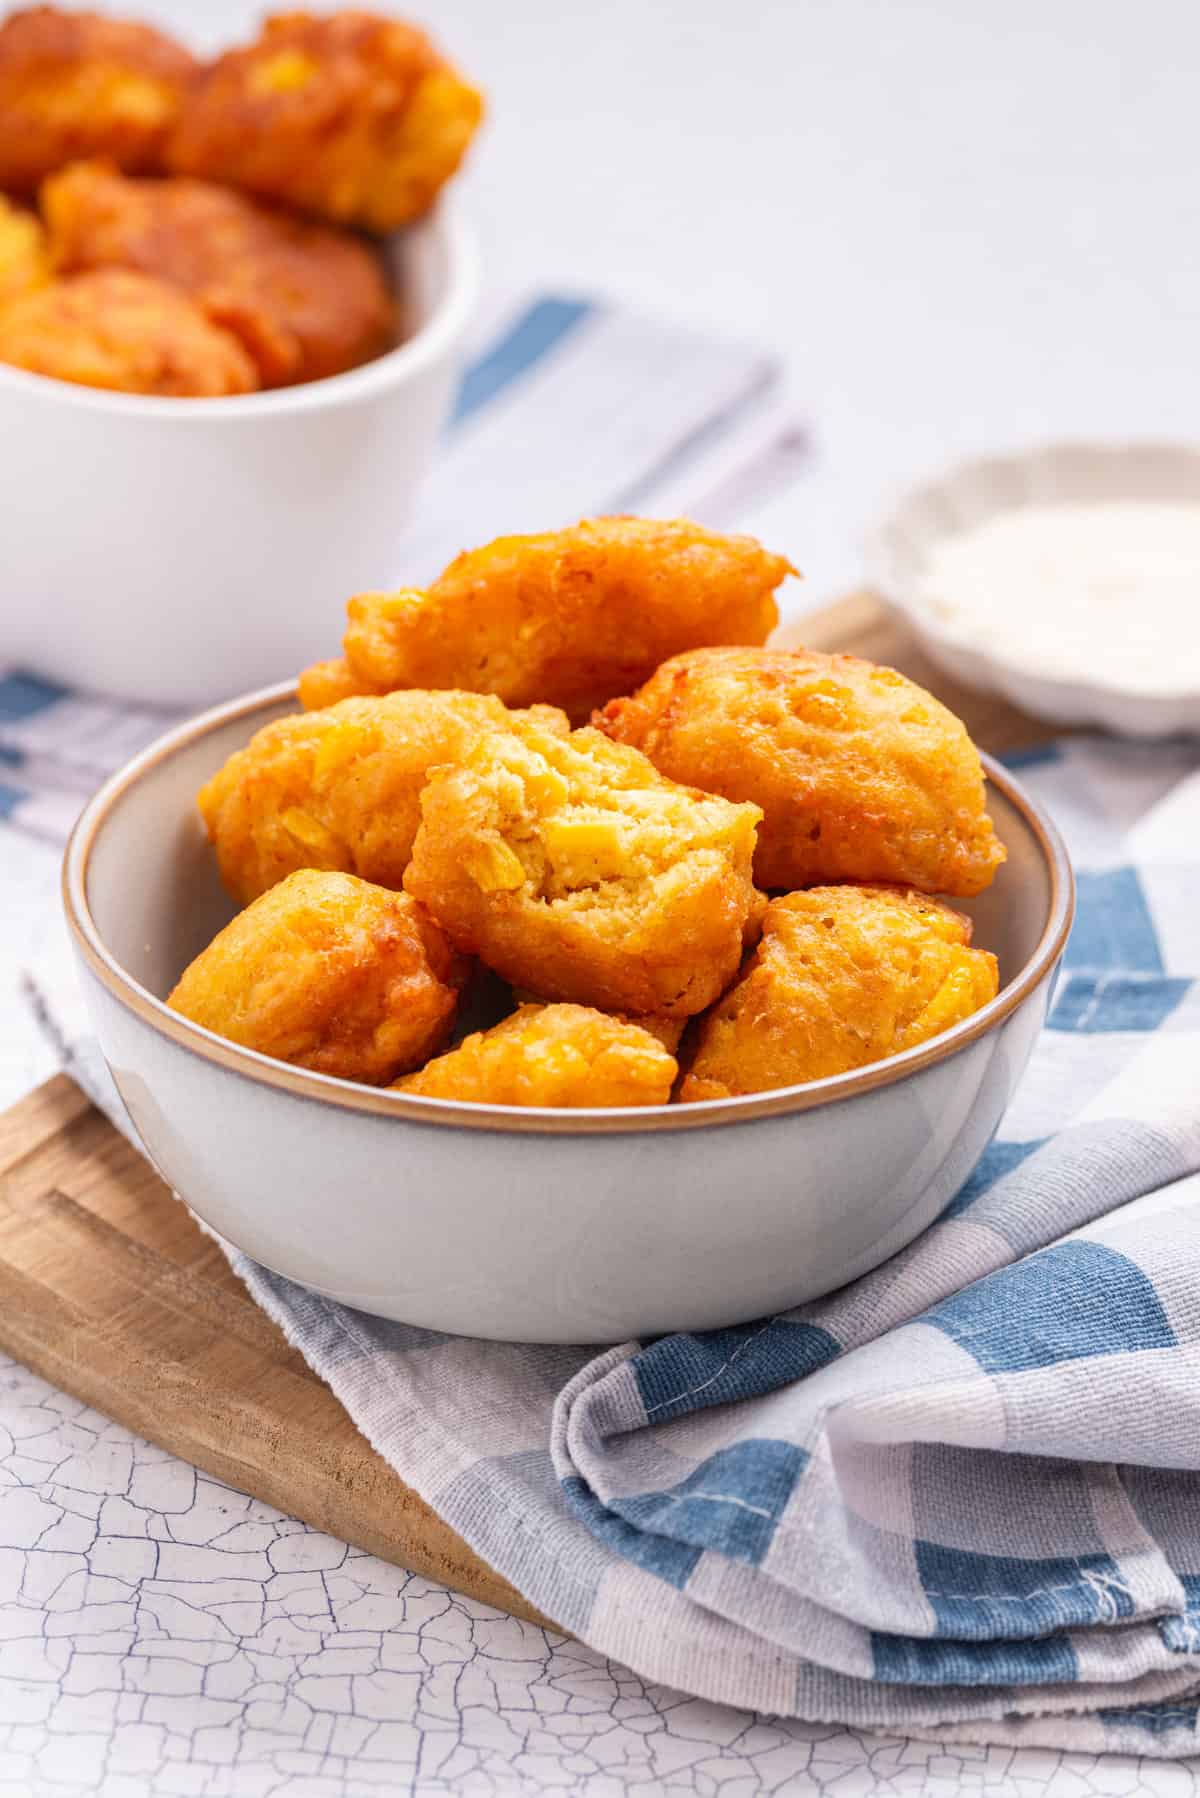 An image of fried corn nuggets in a bowl.